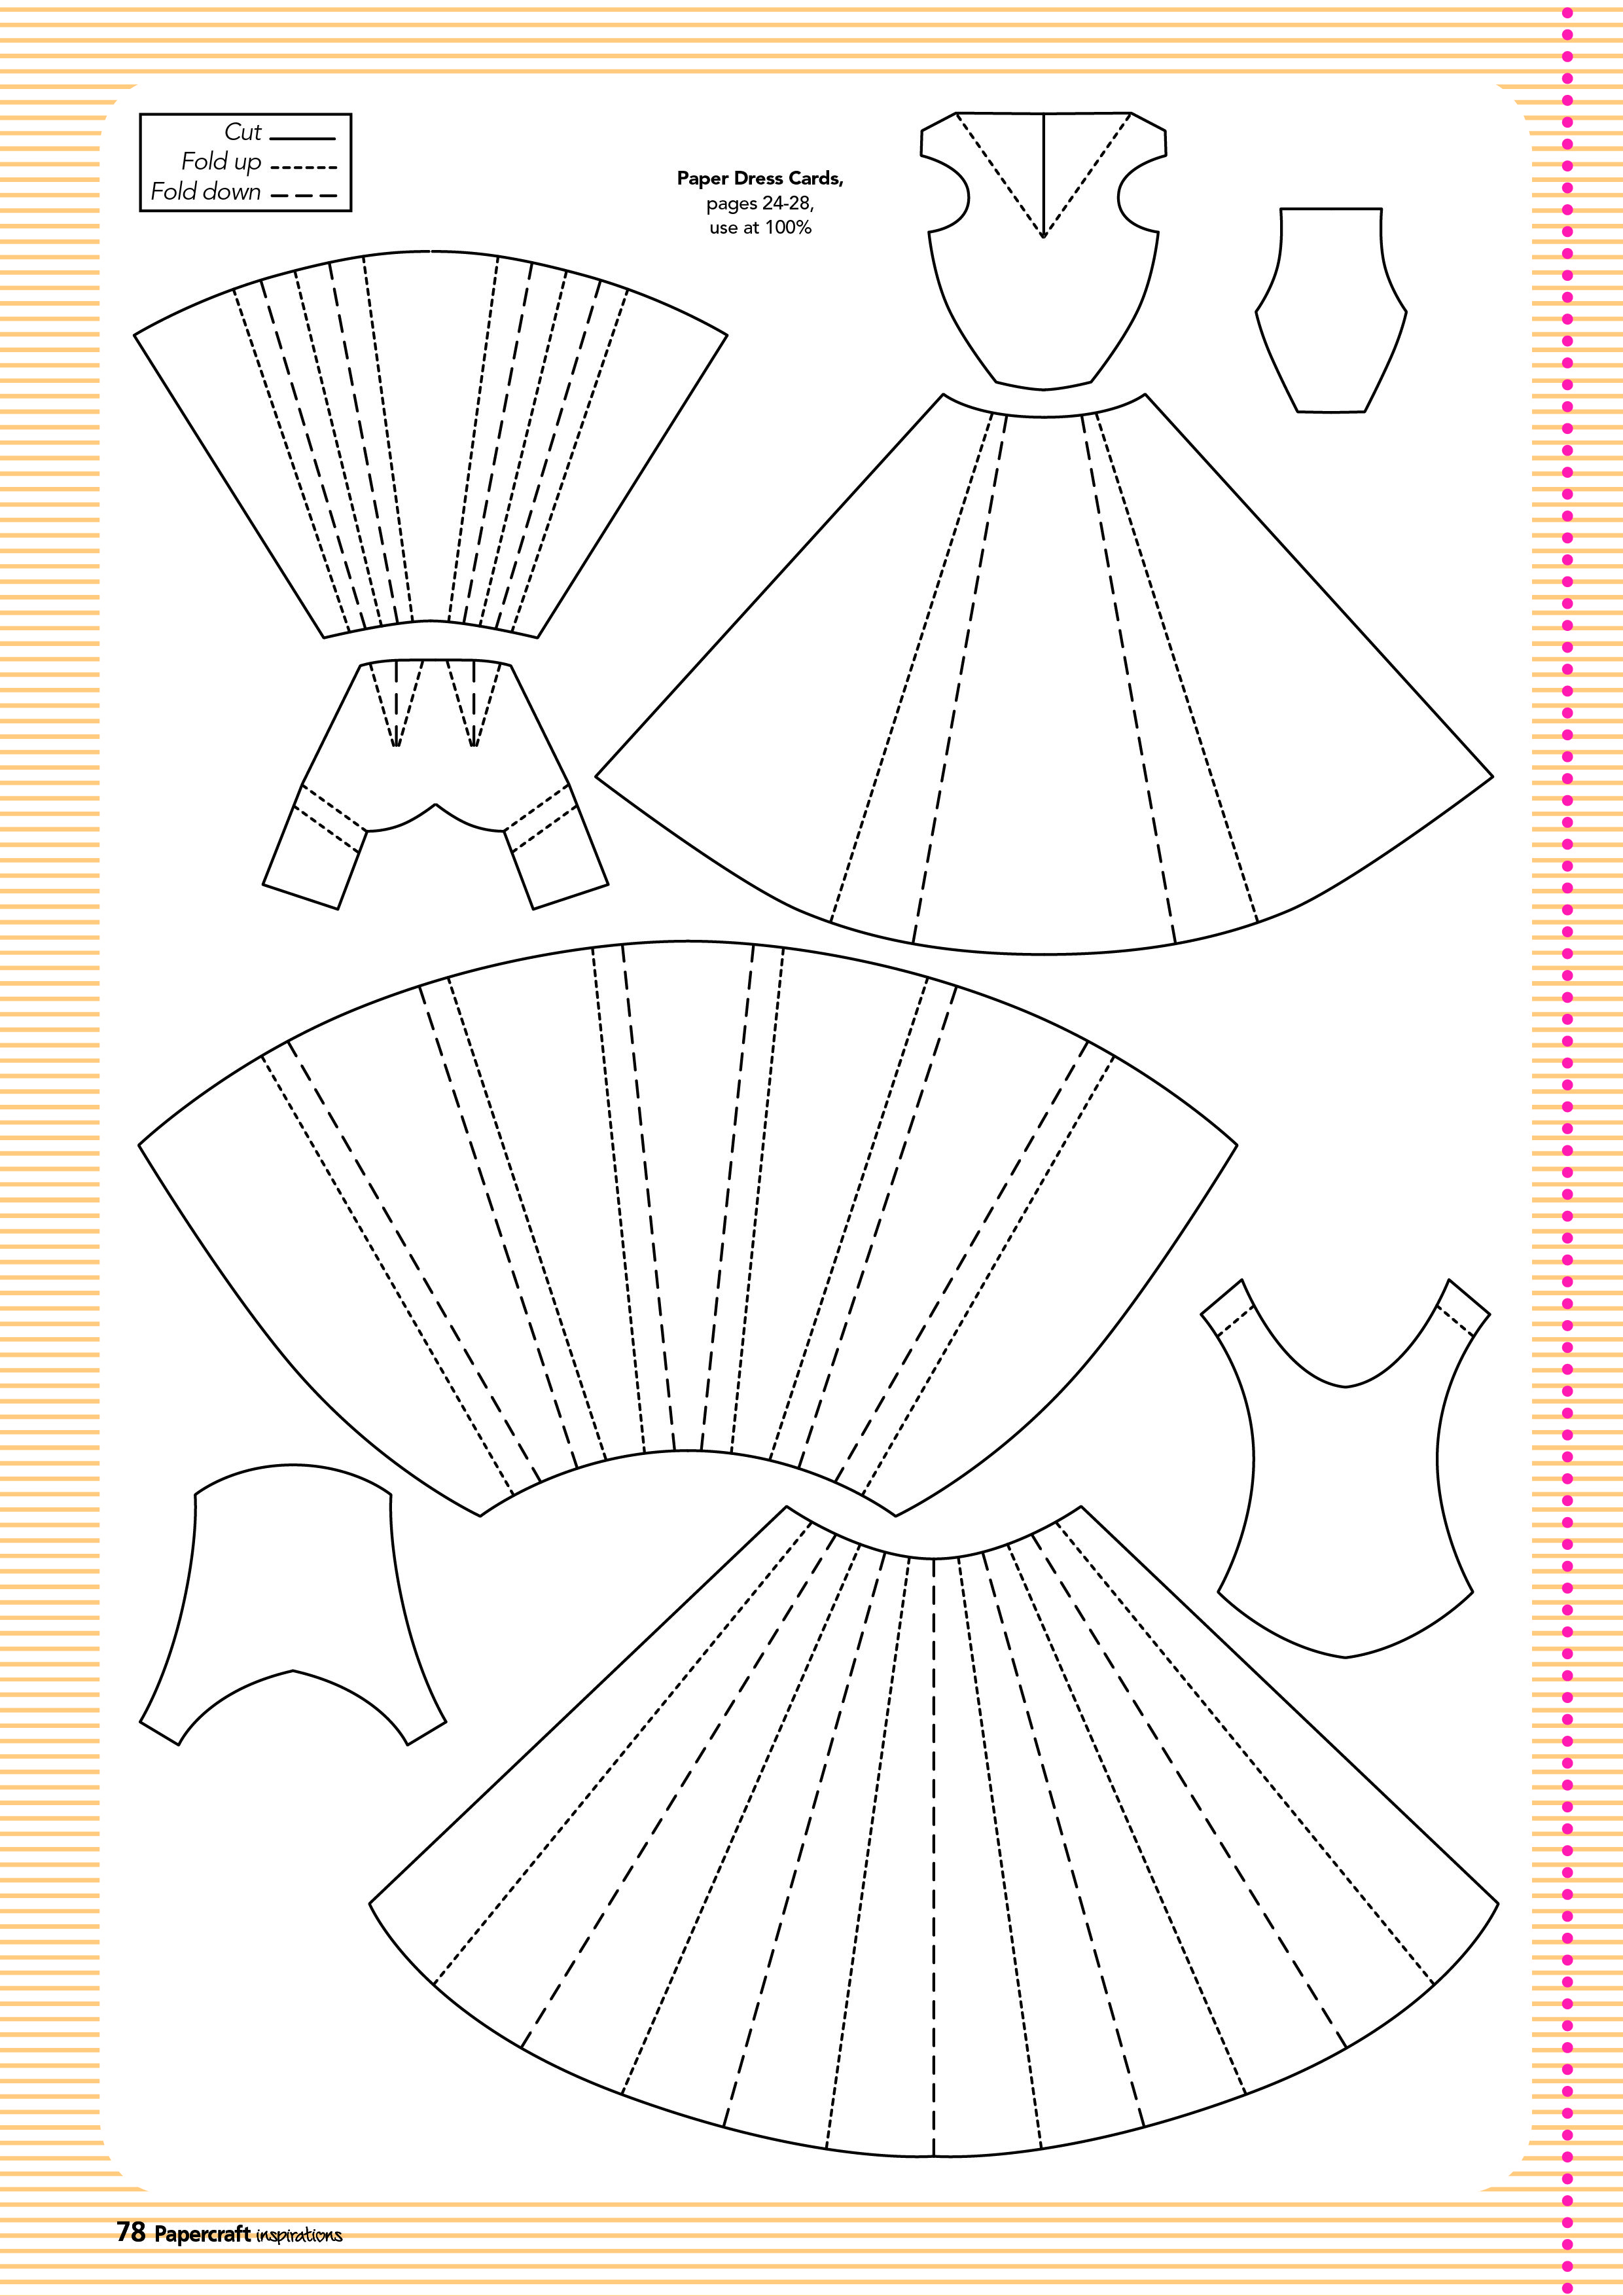 Free Templates From Papercraft Inspirations 129 | Cards-N-Tags - Free Card Making Templates Printable